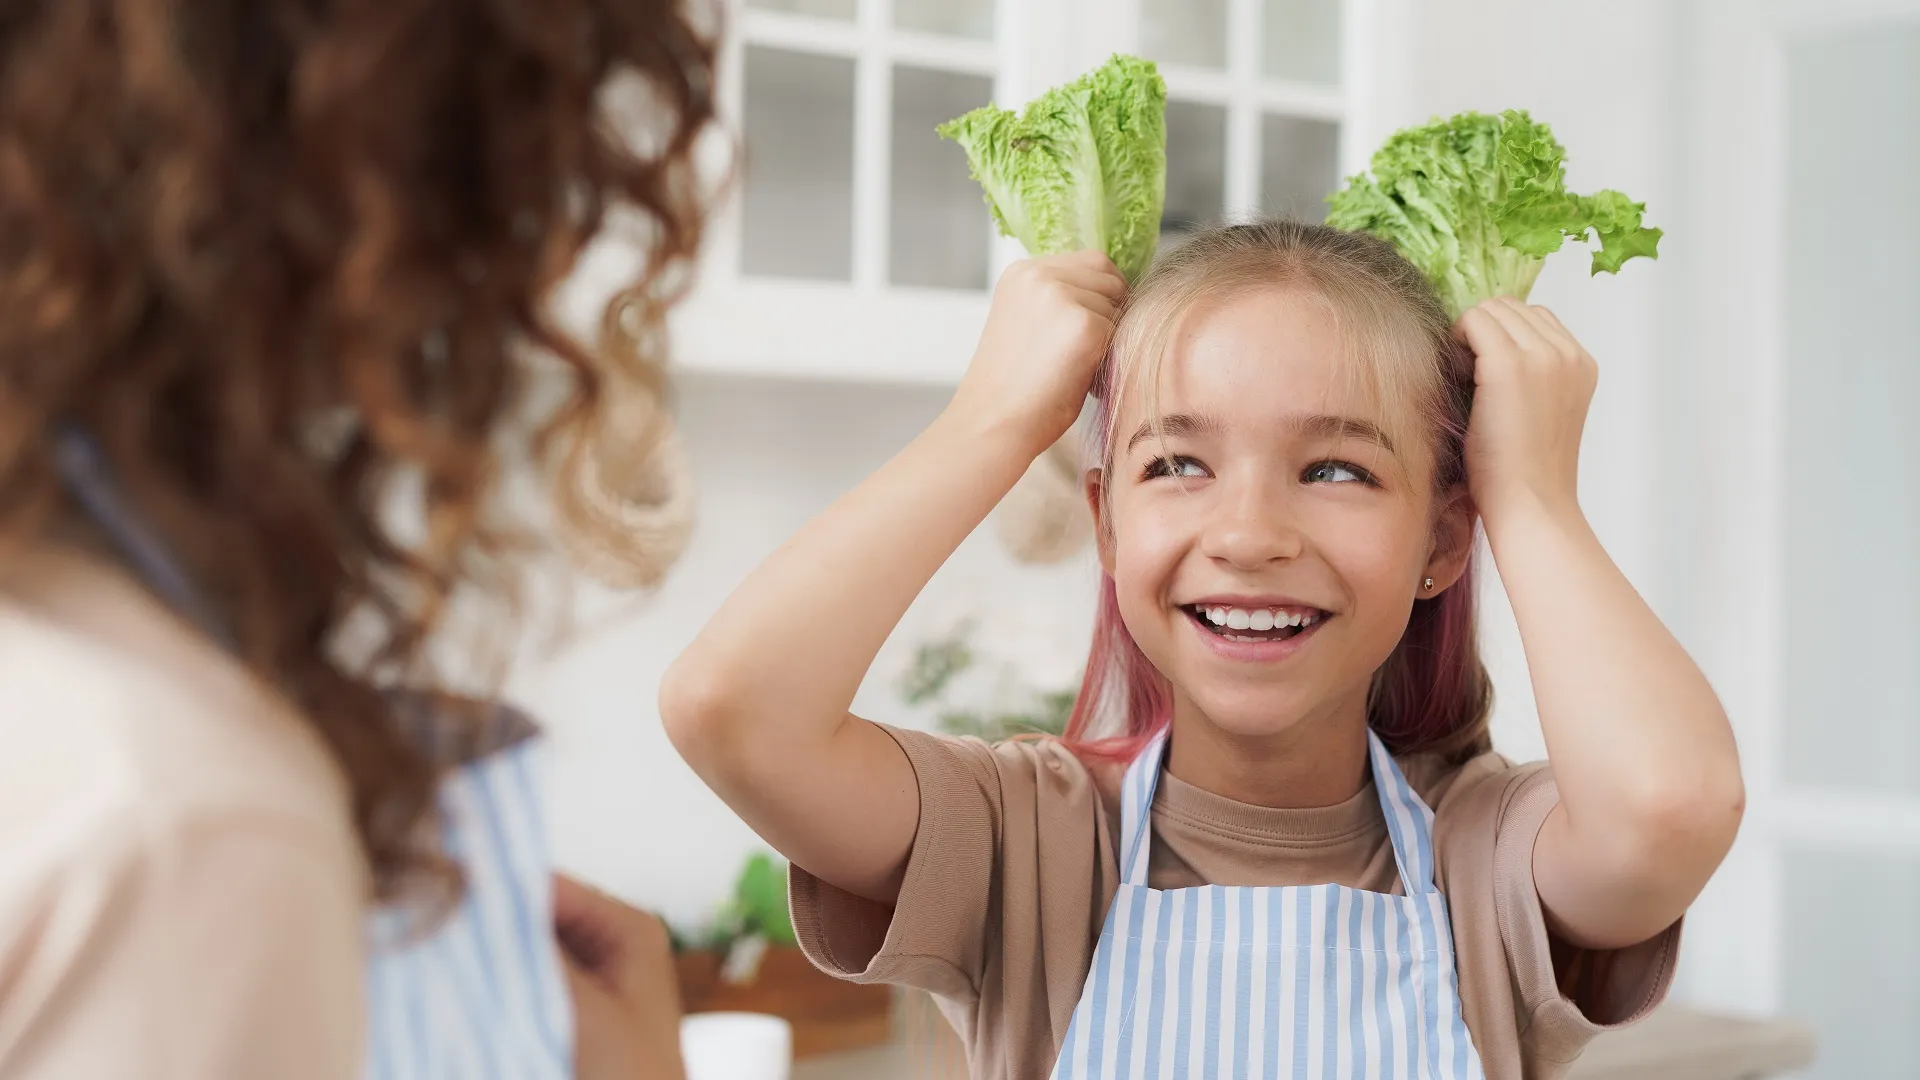 Mother and daughter playing and having fun with vegetables in kitchen stock photo